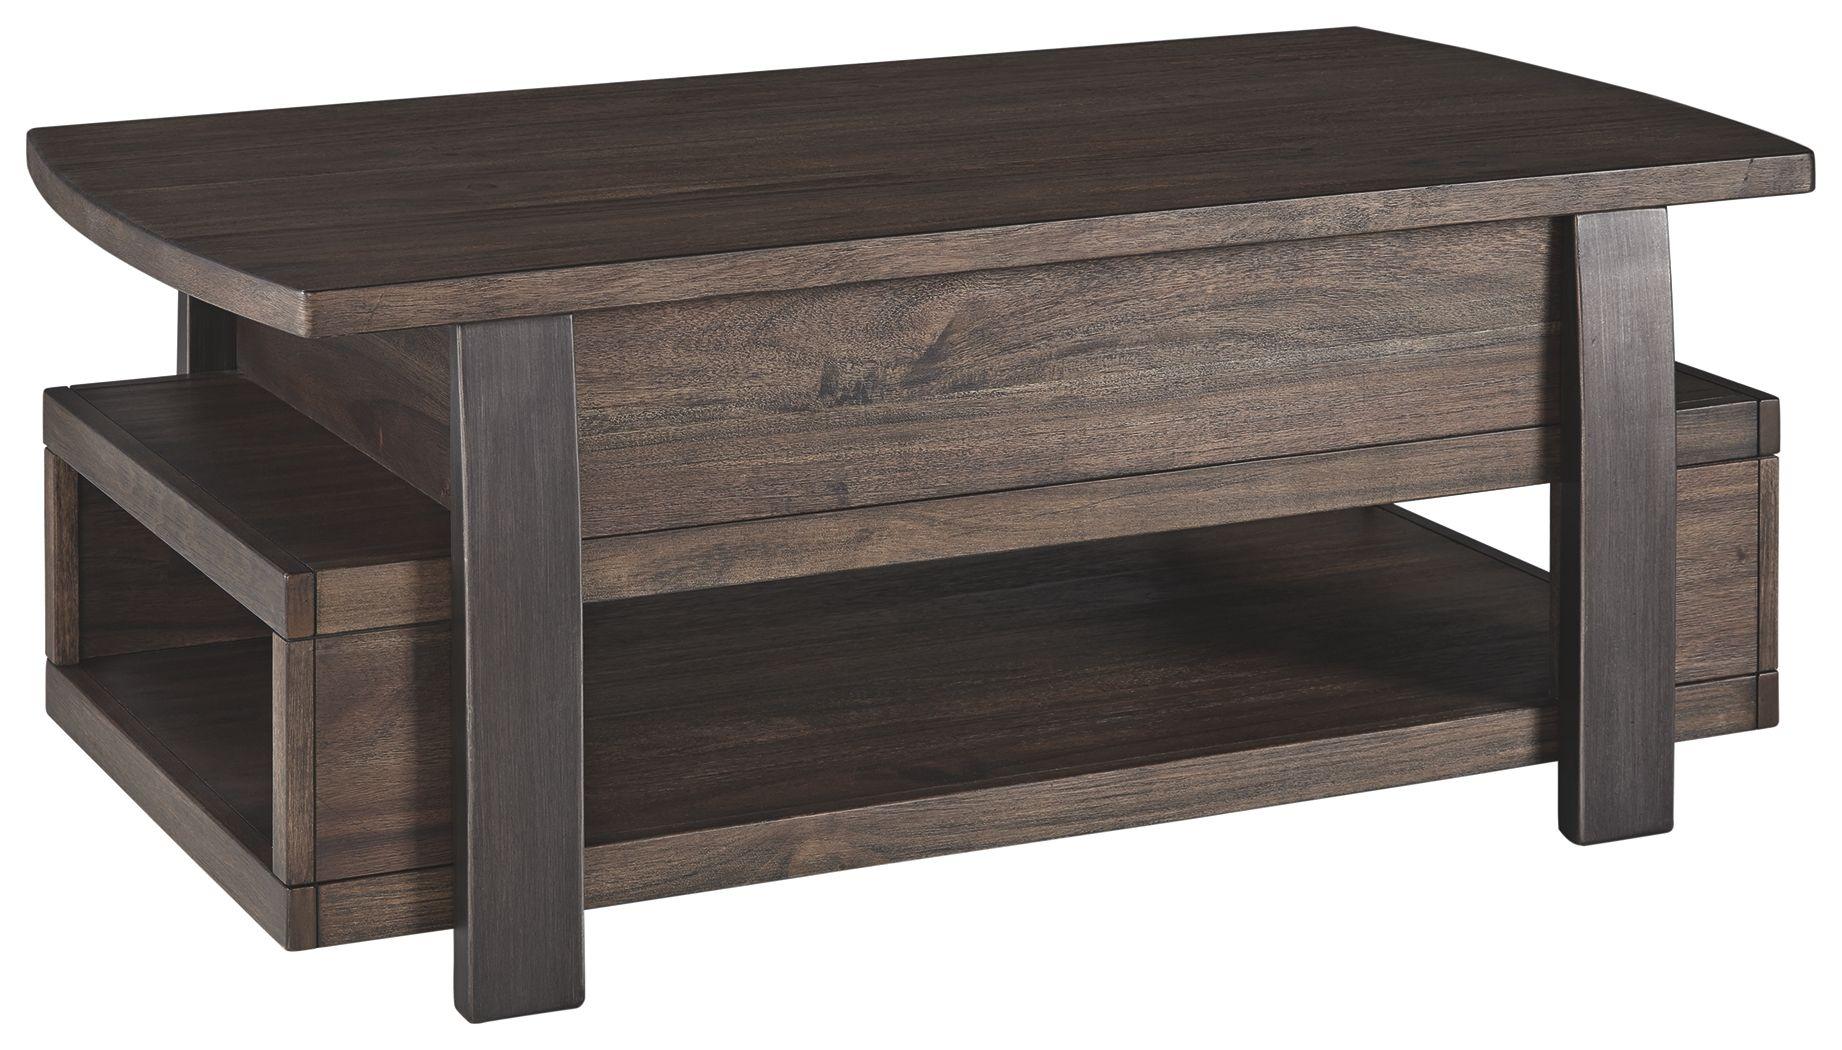 Ashley Furniture - Vailbry - Brown - Lift Top Cocktail Table - 5th Avenue Furniture